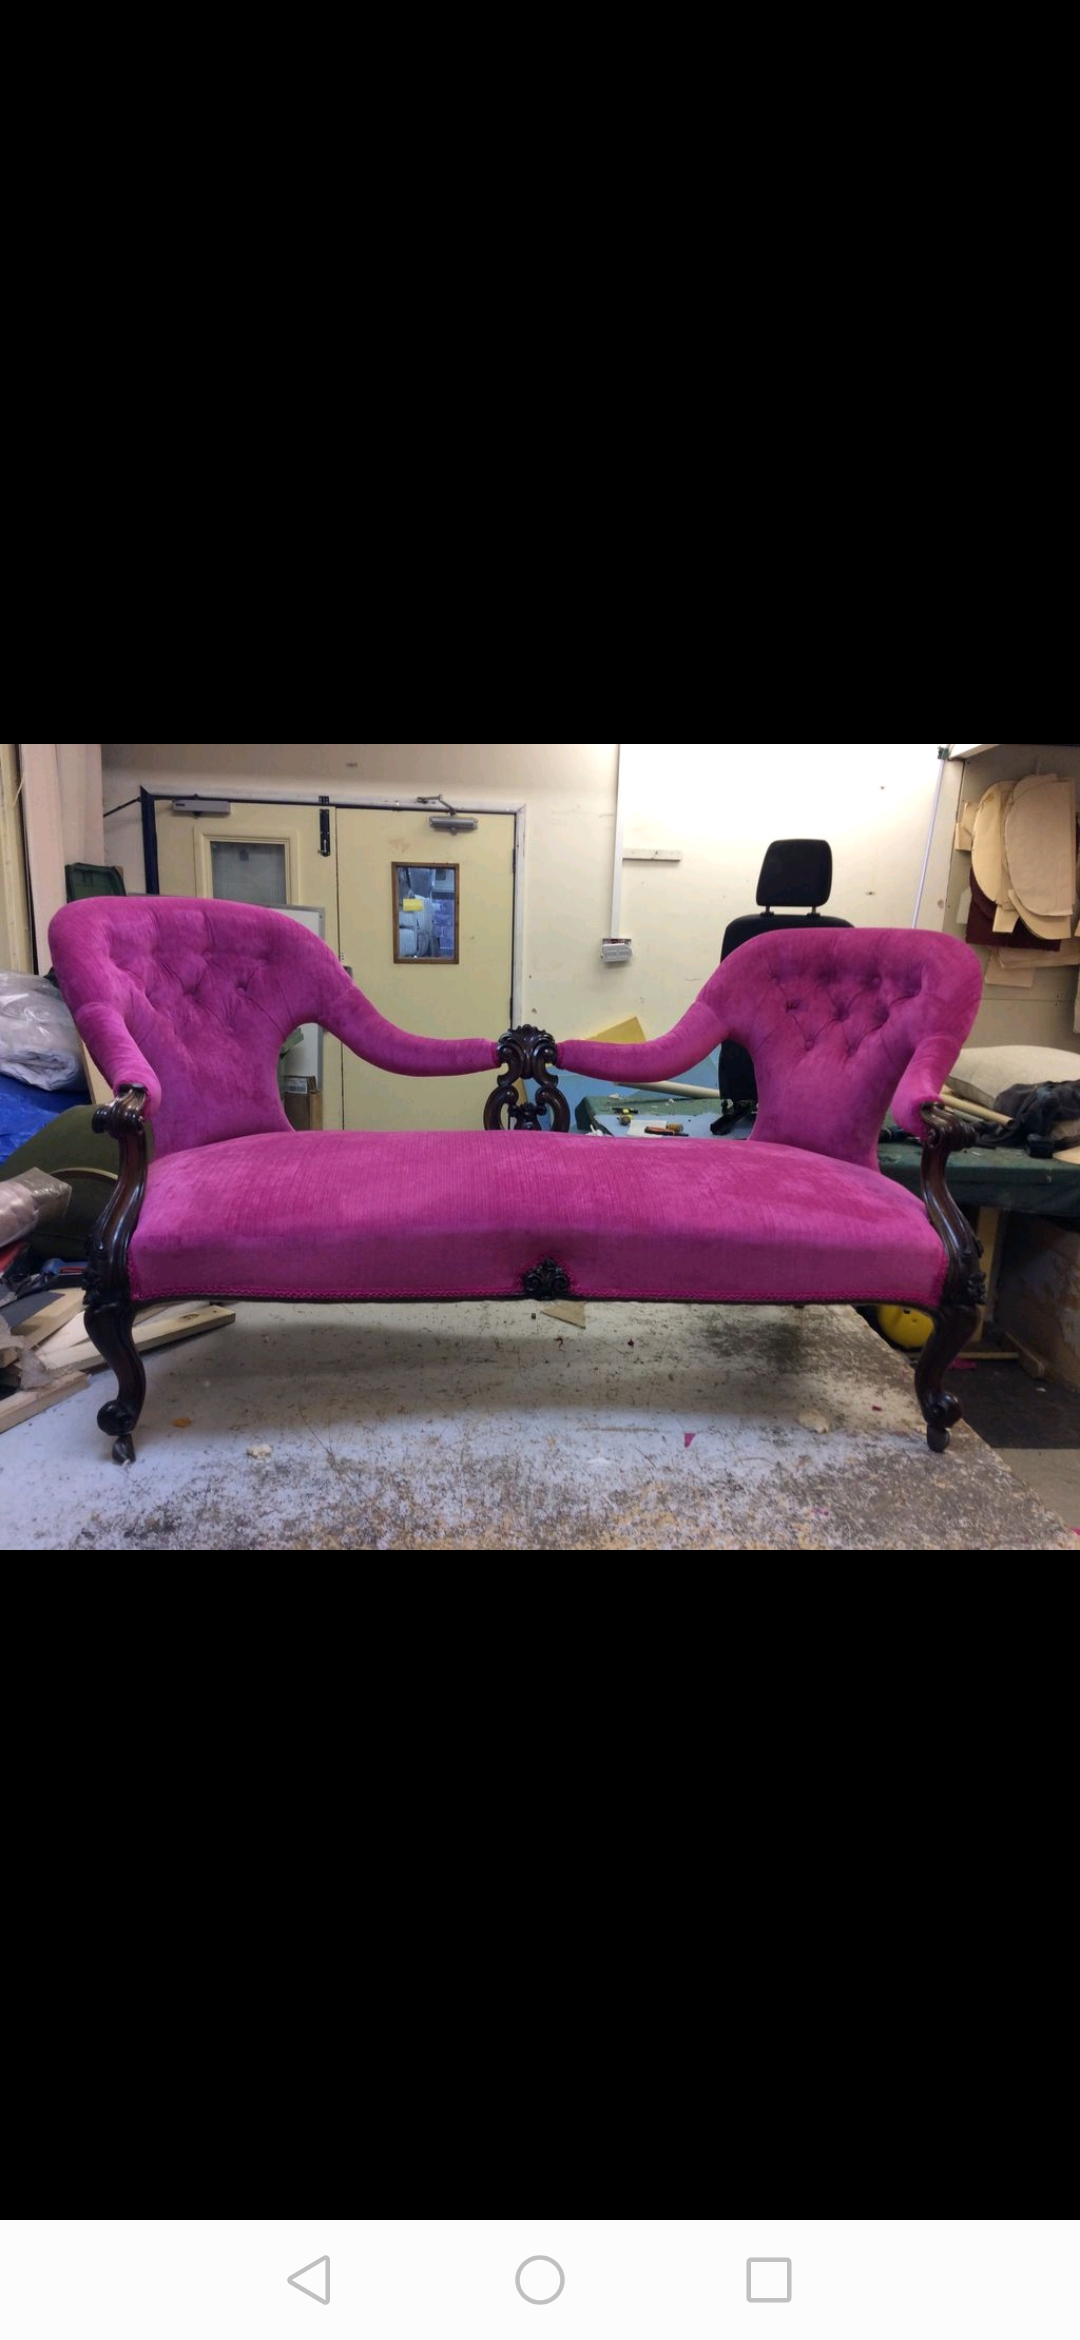 A1 Unique Upholstery - Upholstery 39